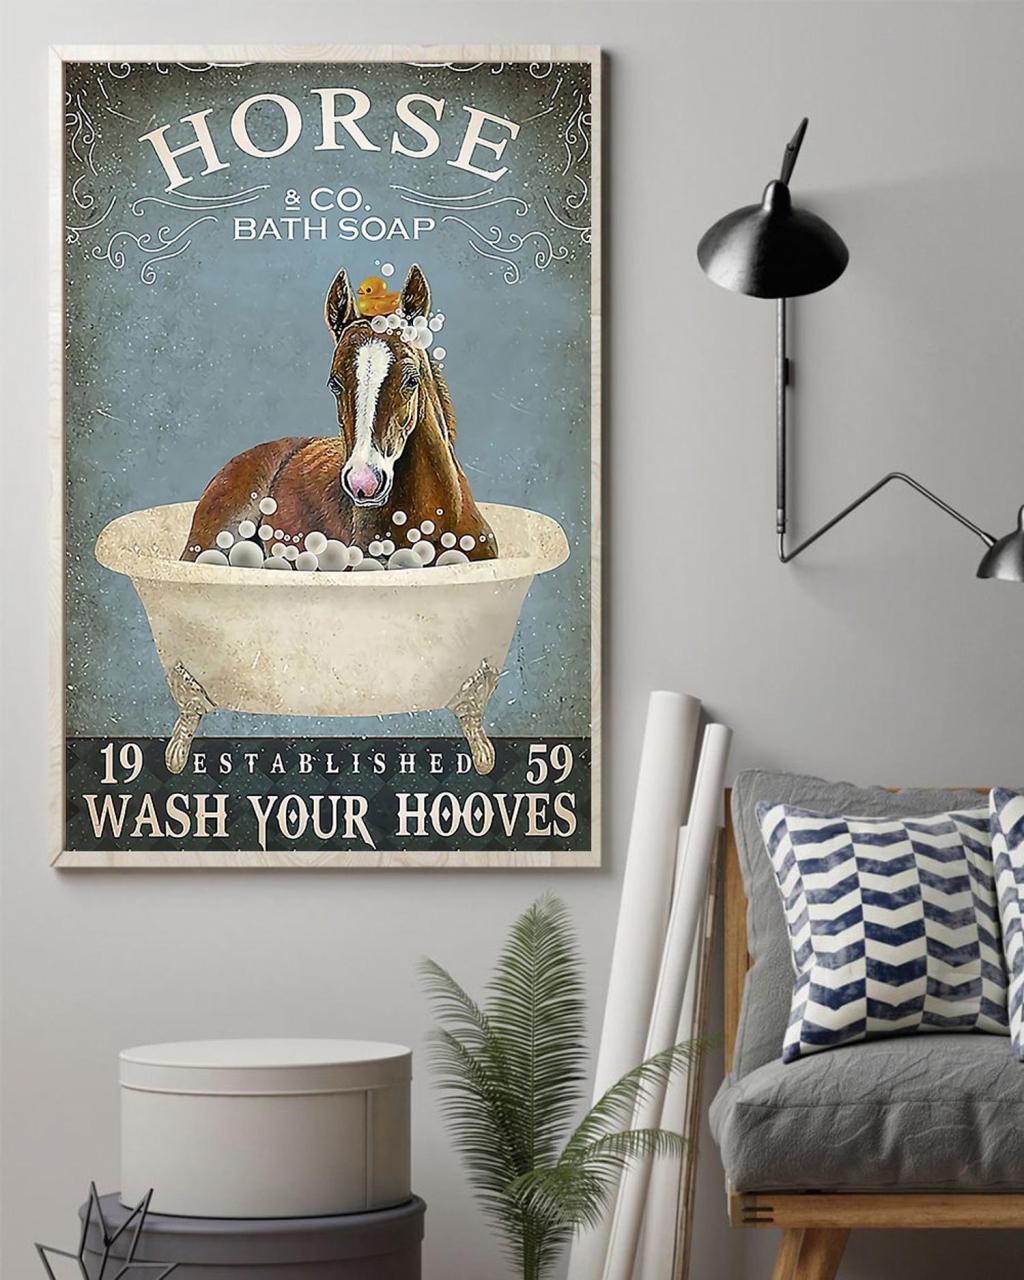 Horse Co Bath Soap Wash Your Hooves Poster Horse Lovers Print Bathroom